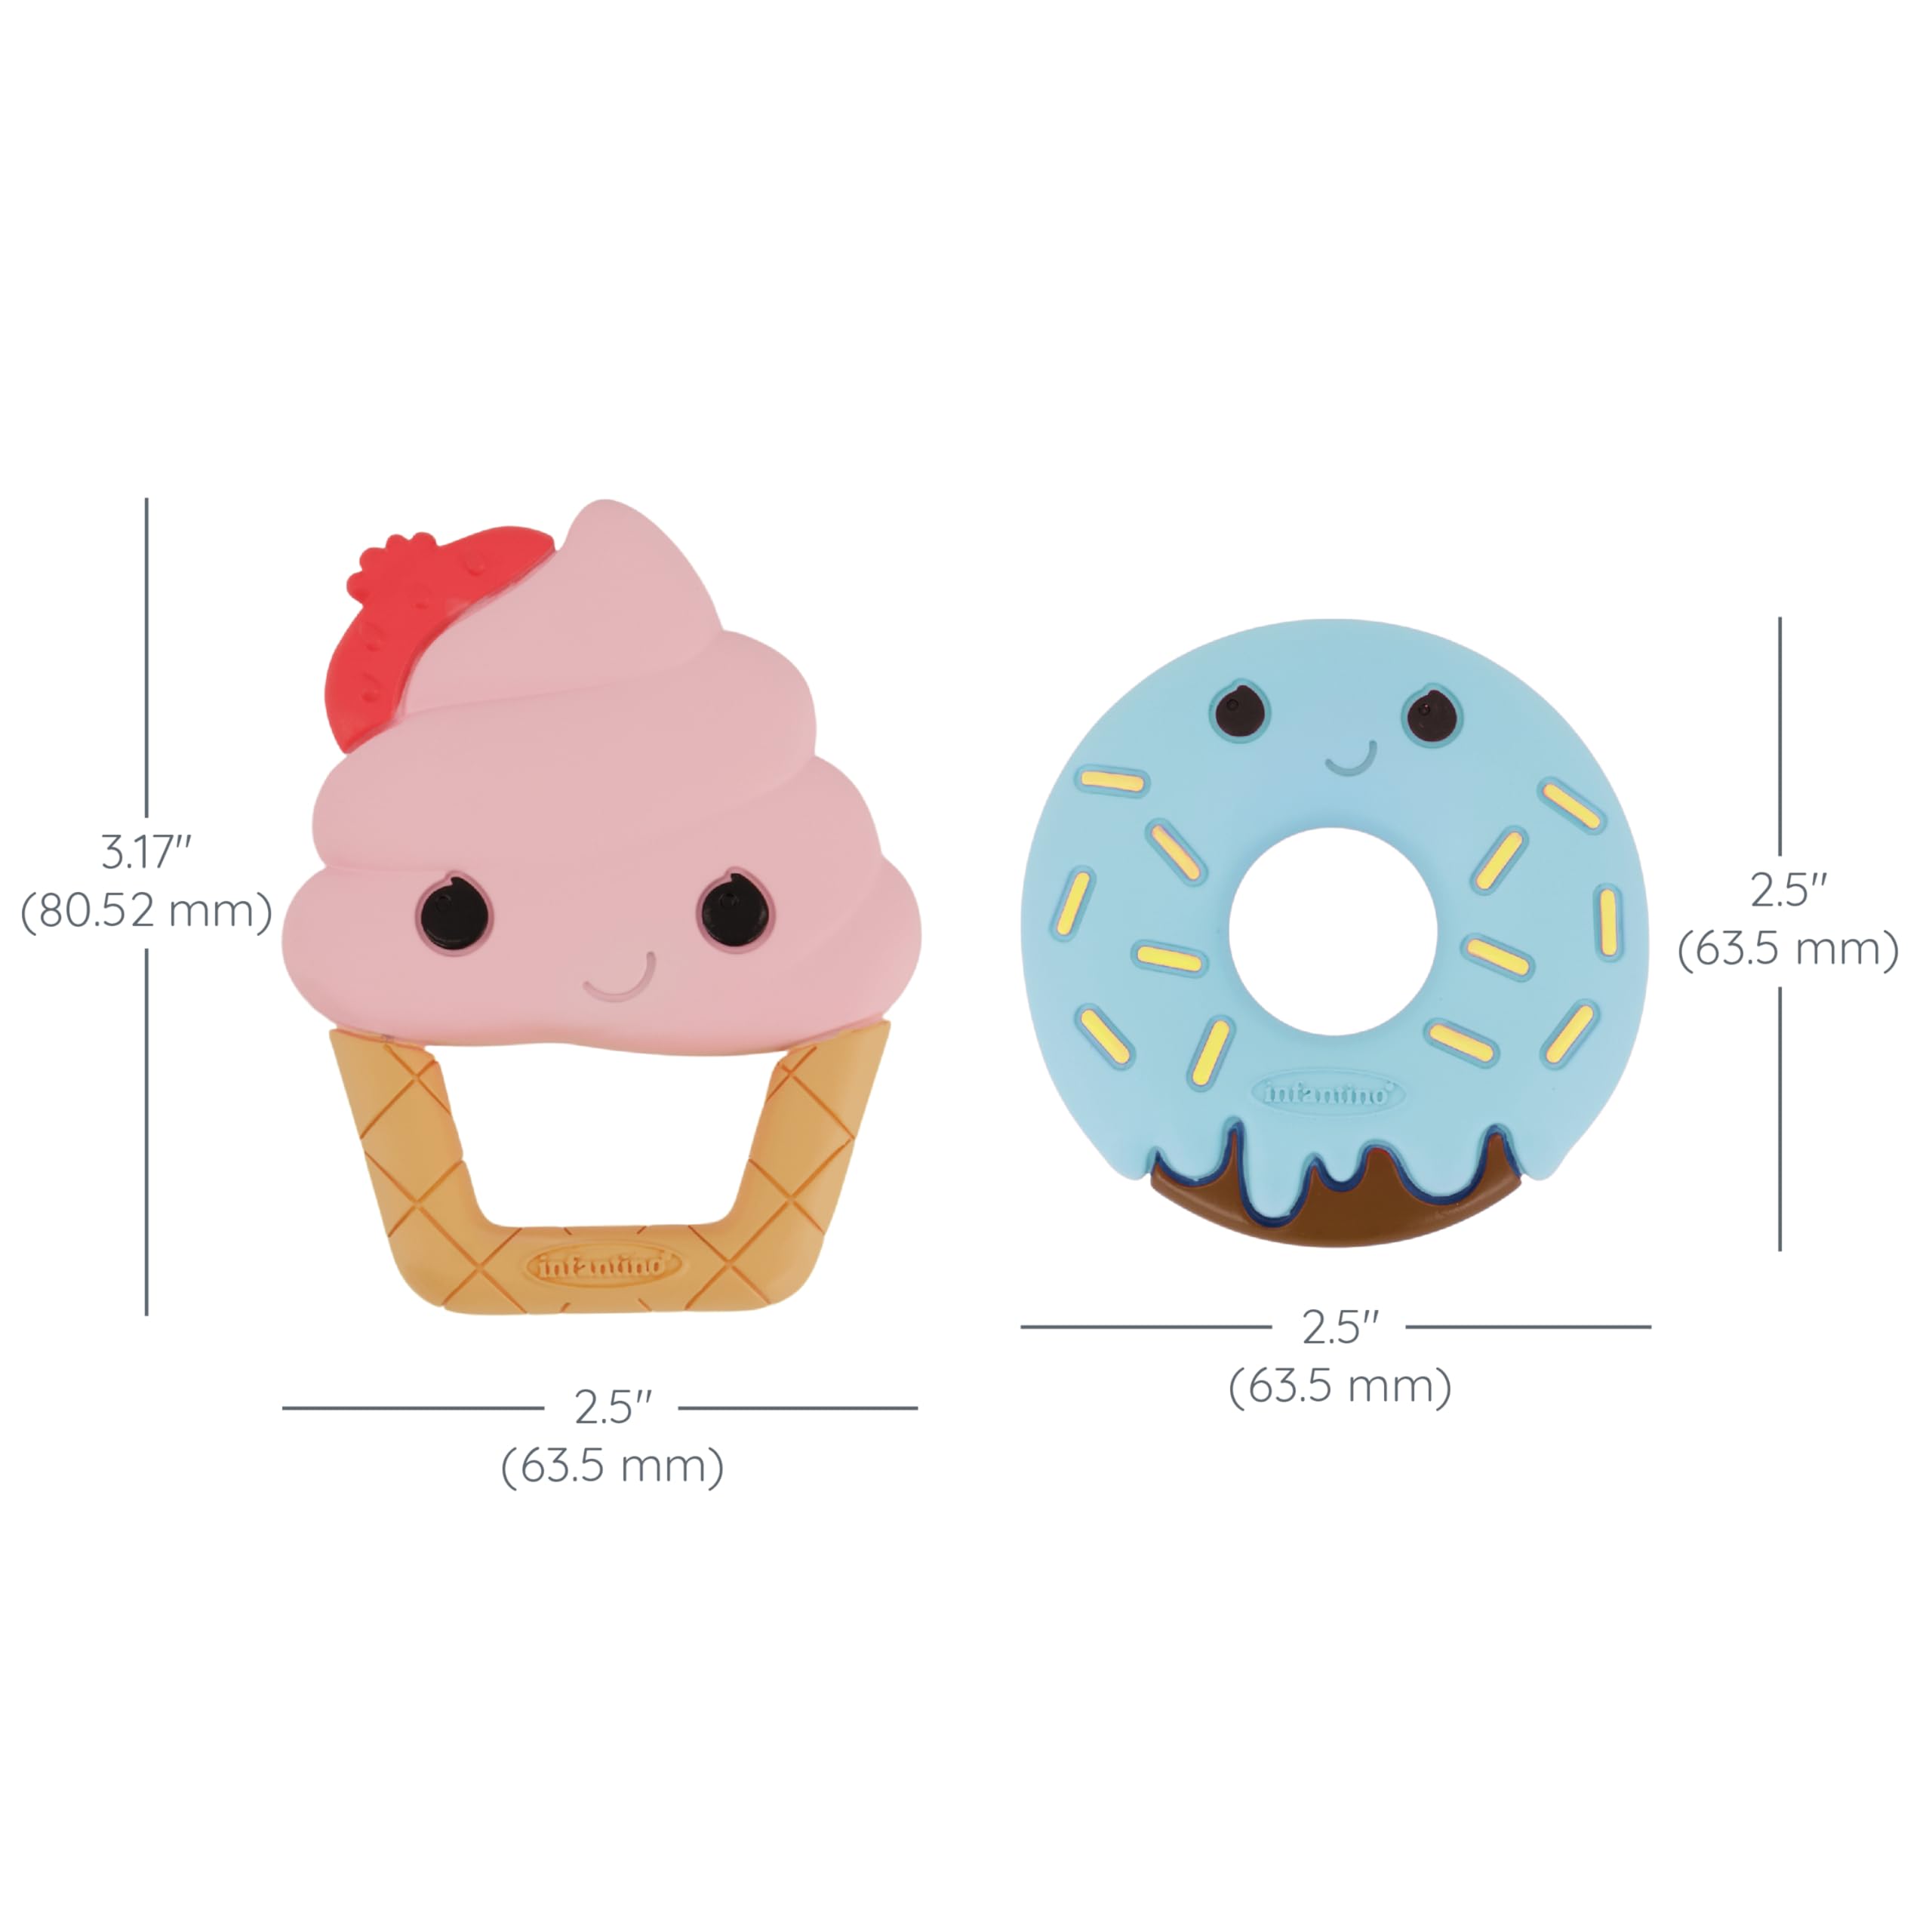 Infantino Sweet Tooth Silicone Teethers, Textured Ice Cream and Donut, 2-Pack